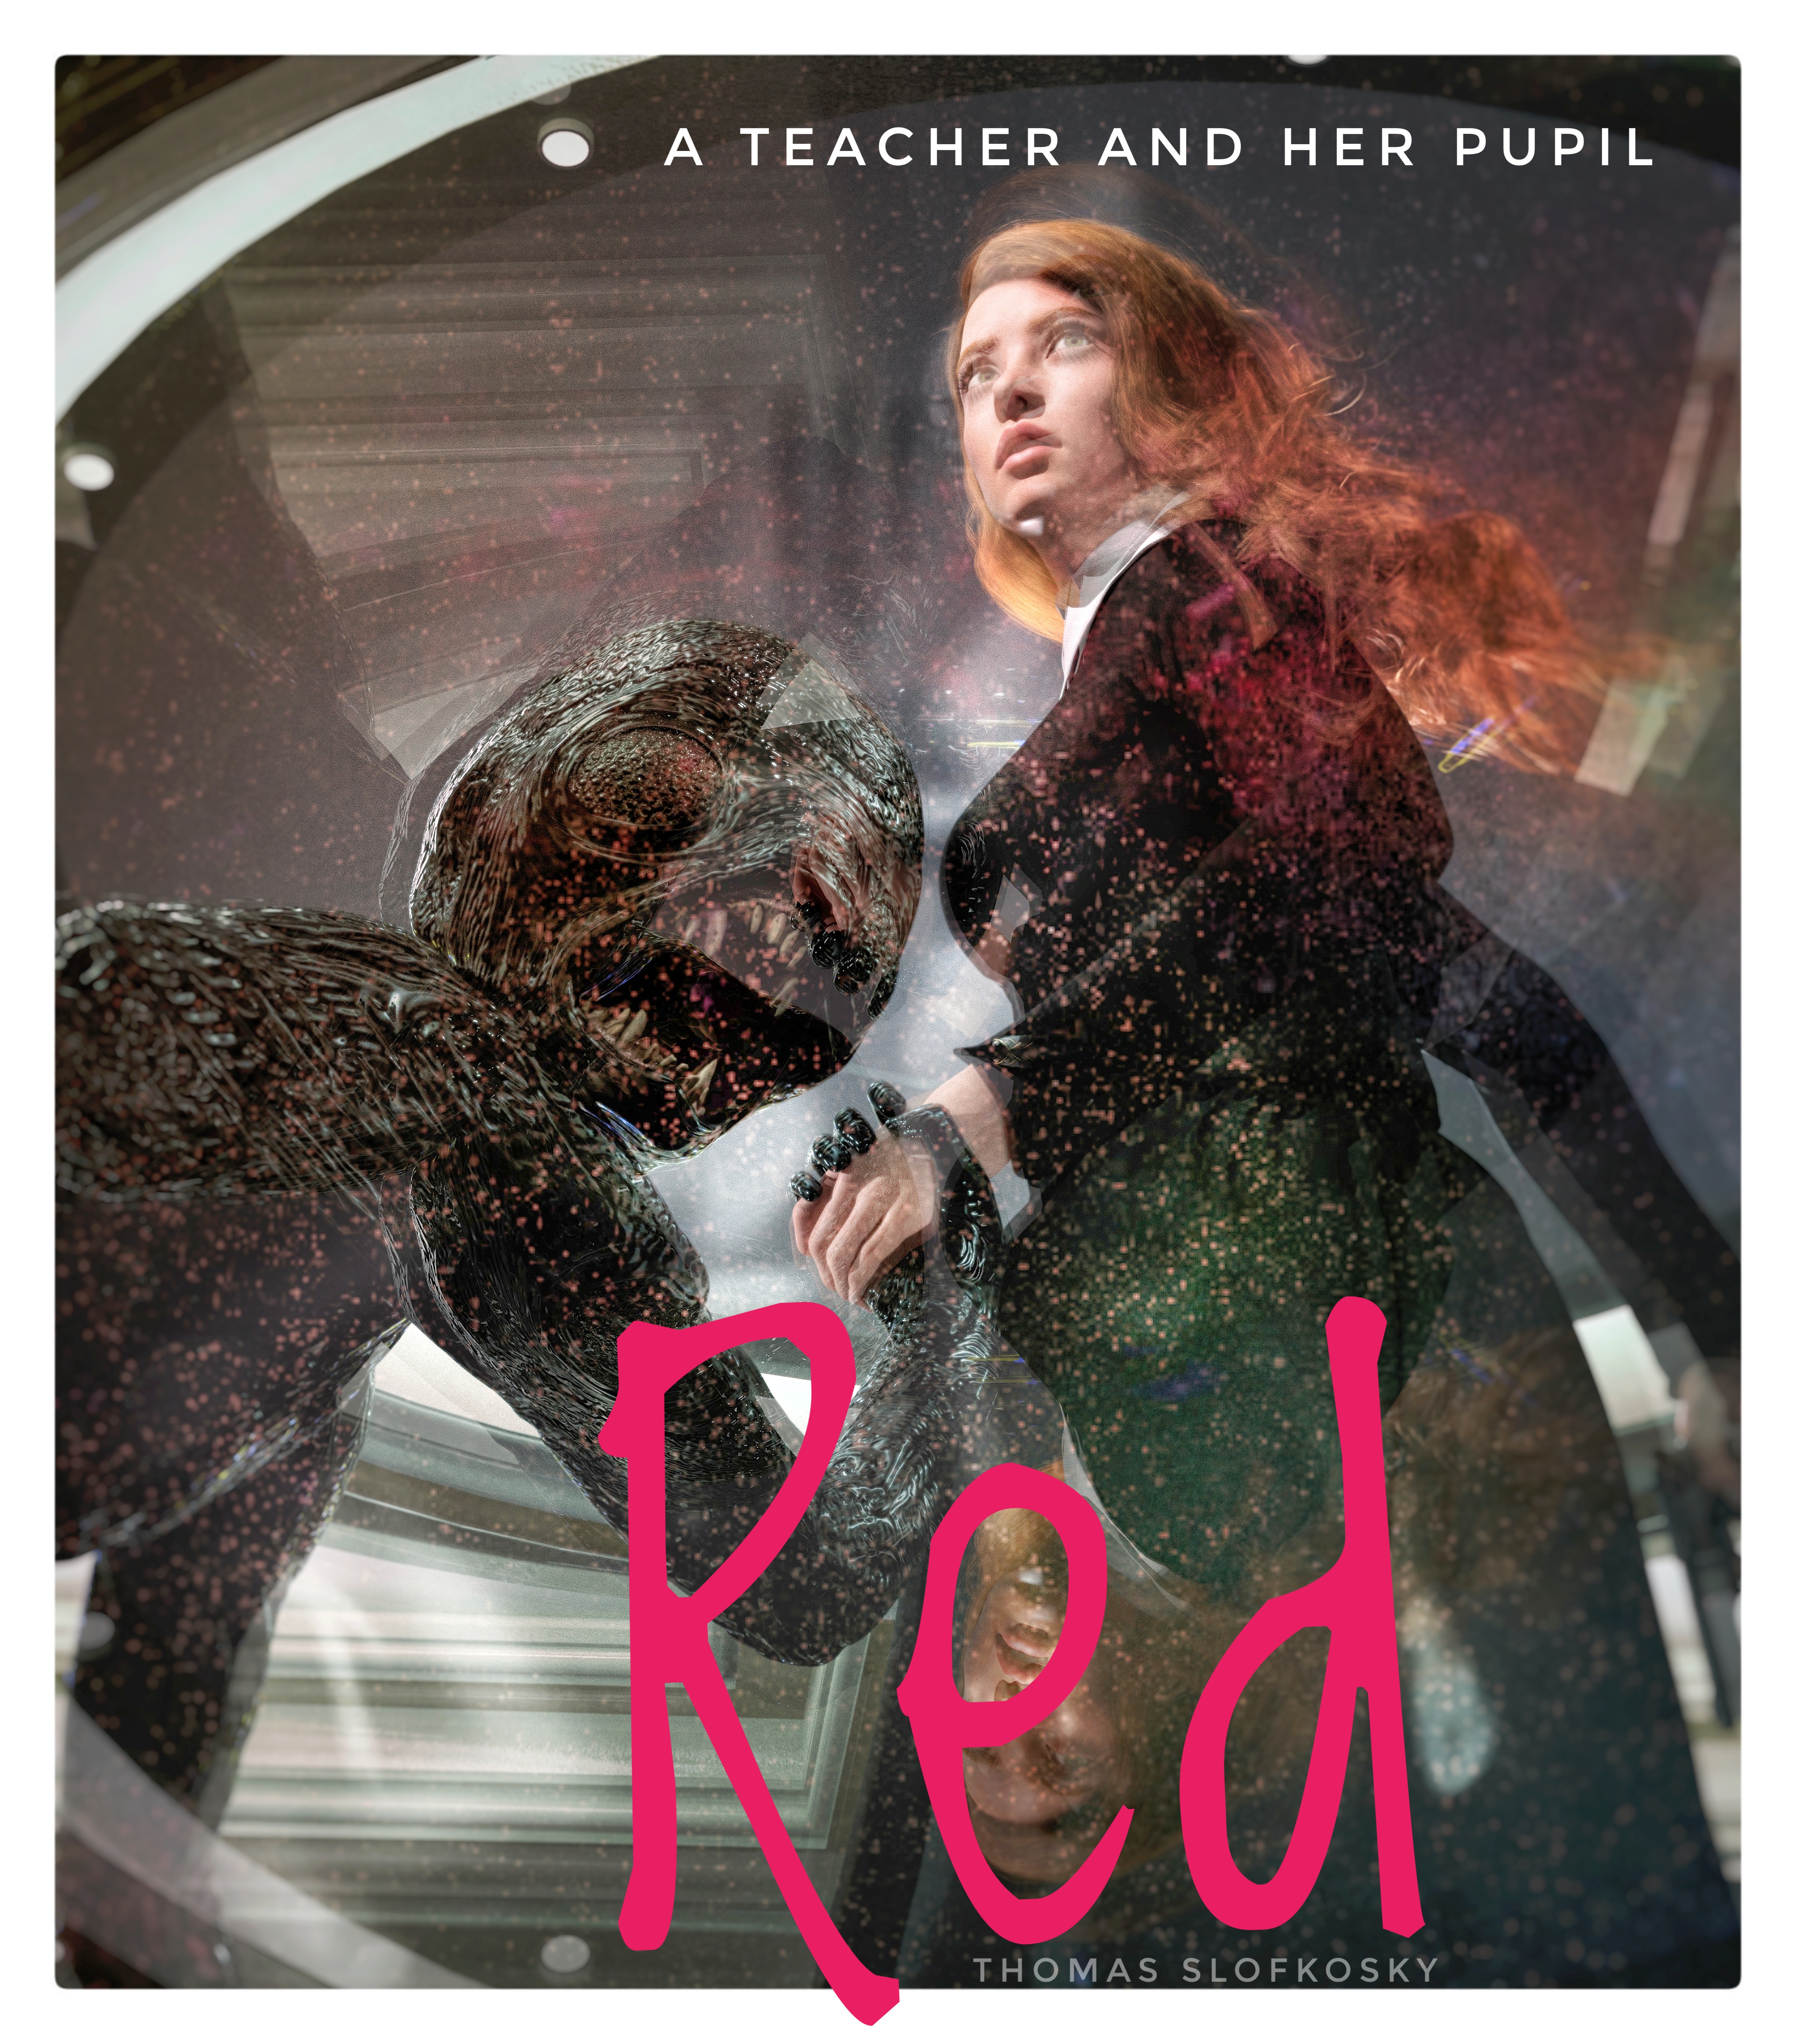 RED - The Movie Poster